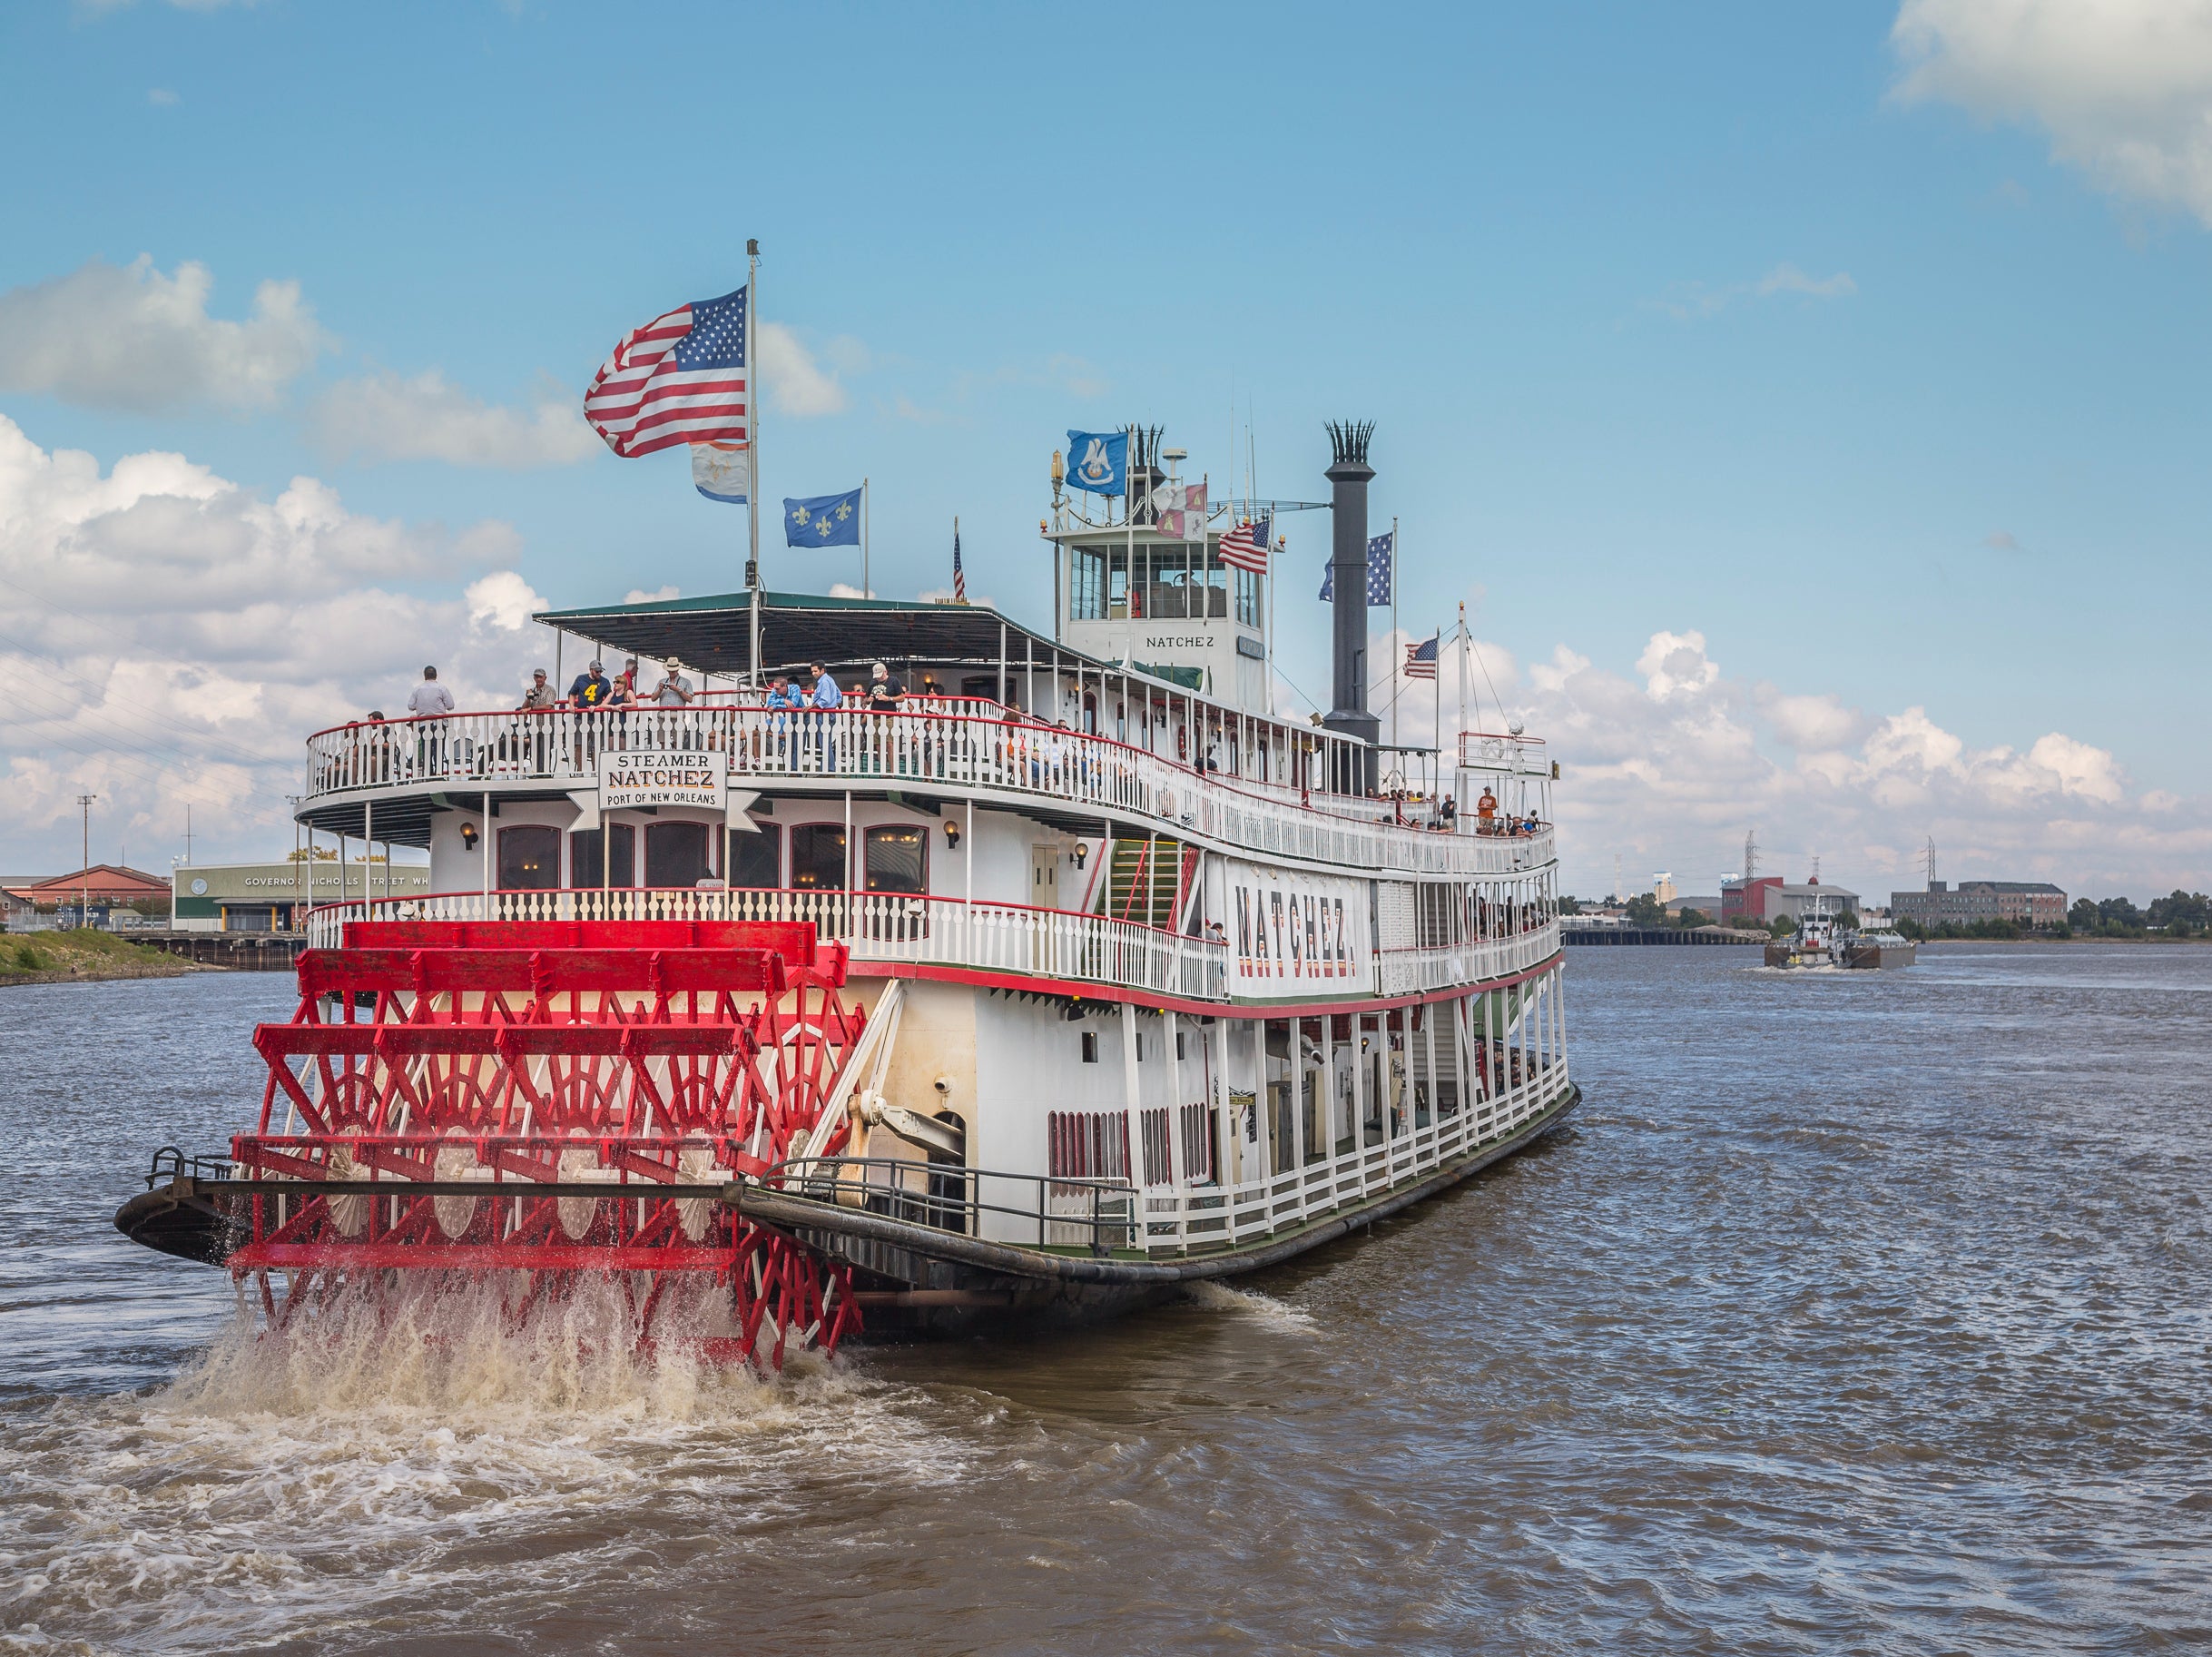 The current Natchez steamer has been in operation for almost 50 years